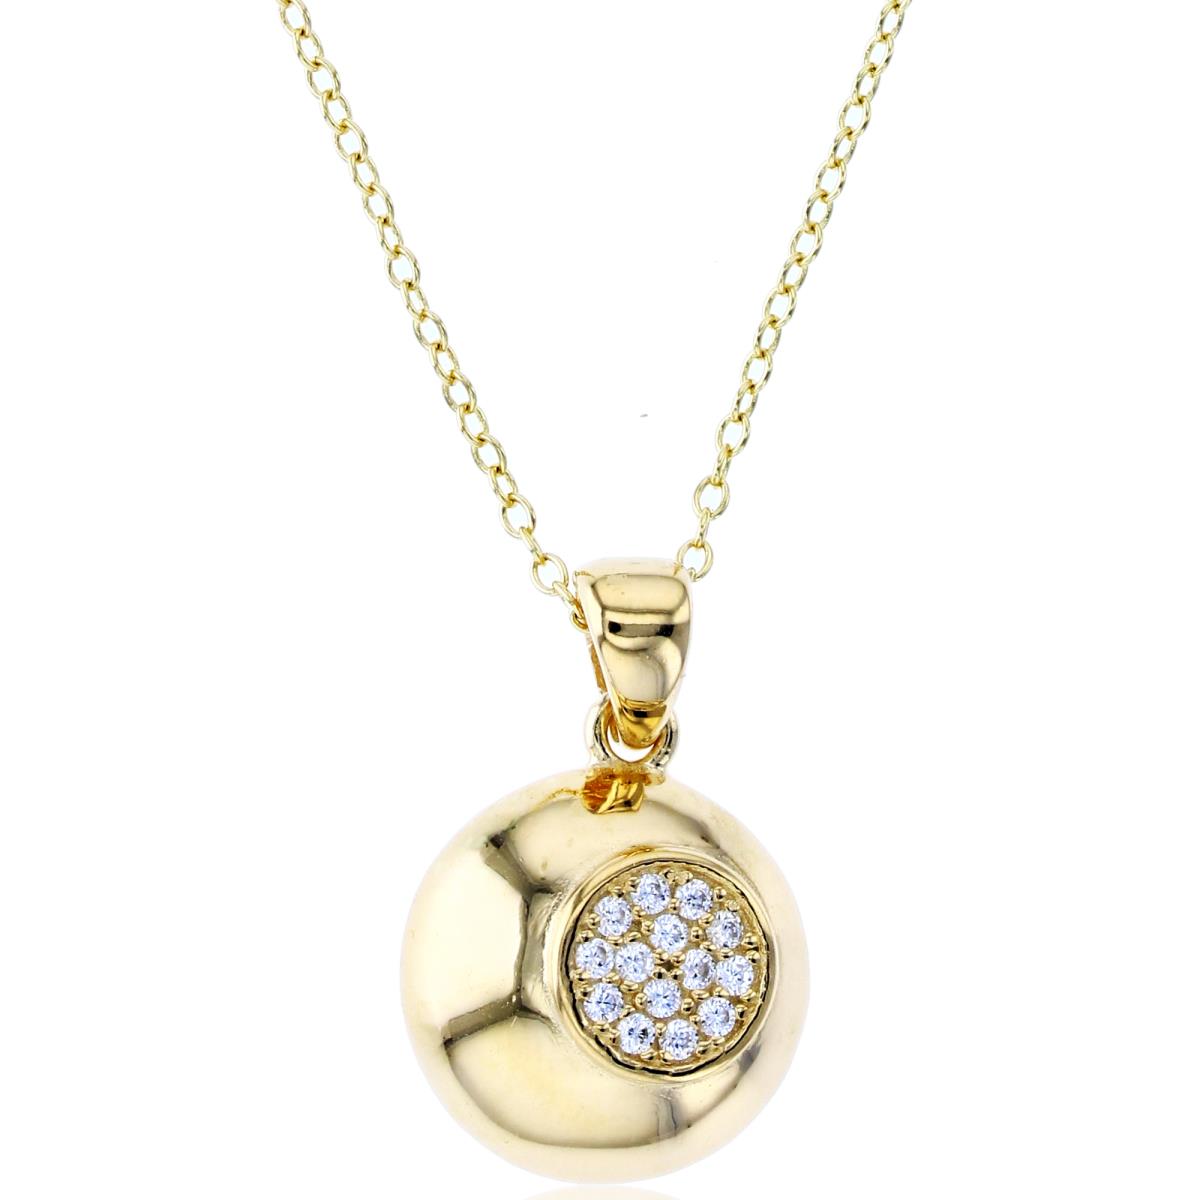 Sterling Silver+1Micron Yellow Gold Rnd White CZ Pave Circle in High Polish Dome Round 16+2"Necklace